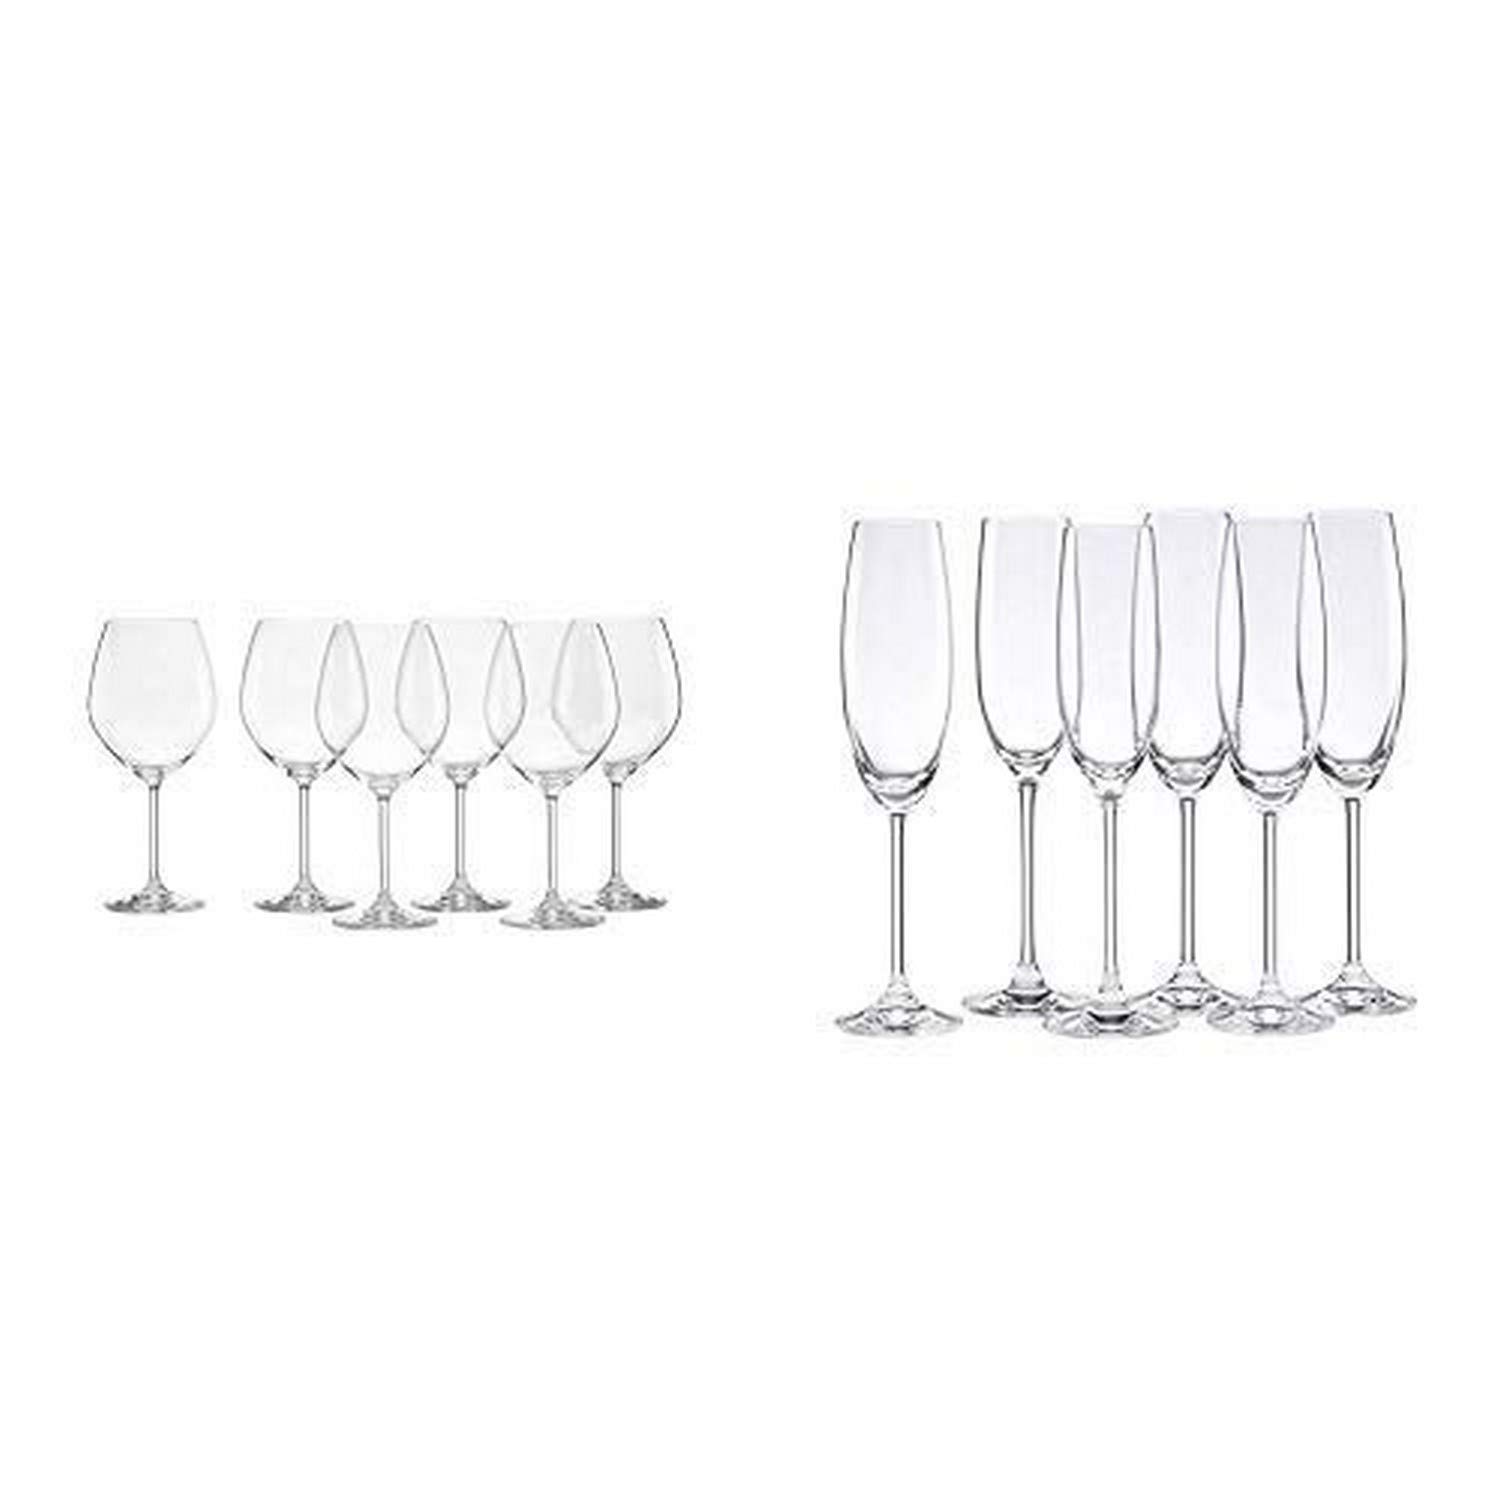 Lenox Tuscany Classics Red Wine Glasses, Buy 4, Get 6, 24 ounces - 887609 and 845276 Tuscany Classics Champagne Flutes, Buy 4, Get 6